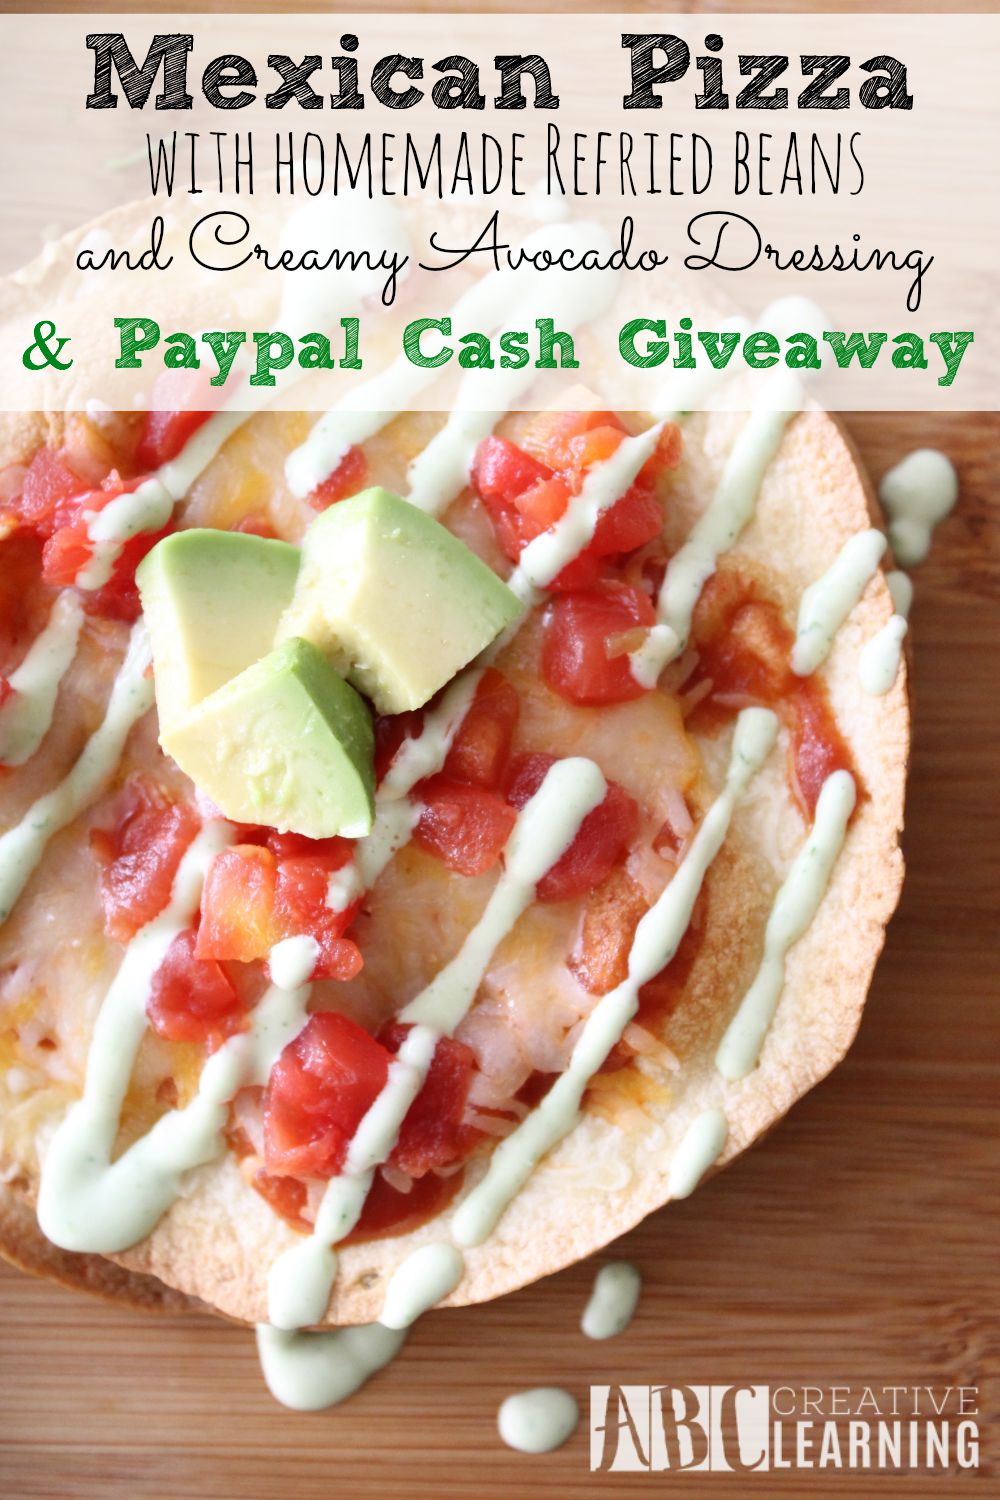 Mexican Pizza with Homemade Refried Beans and Creamy Avocado Dressing and Paypal Cash Giveaway